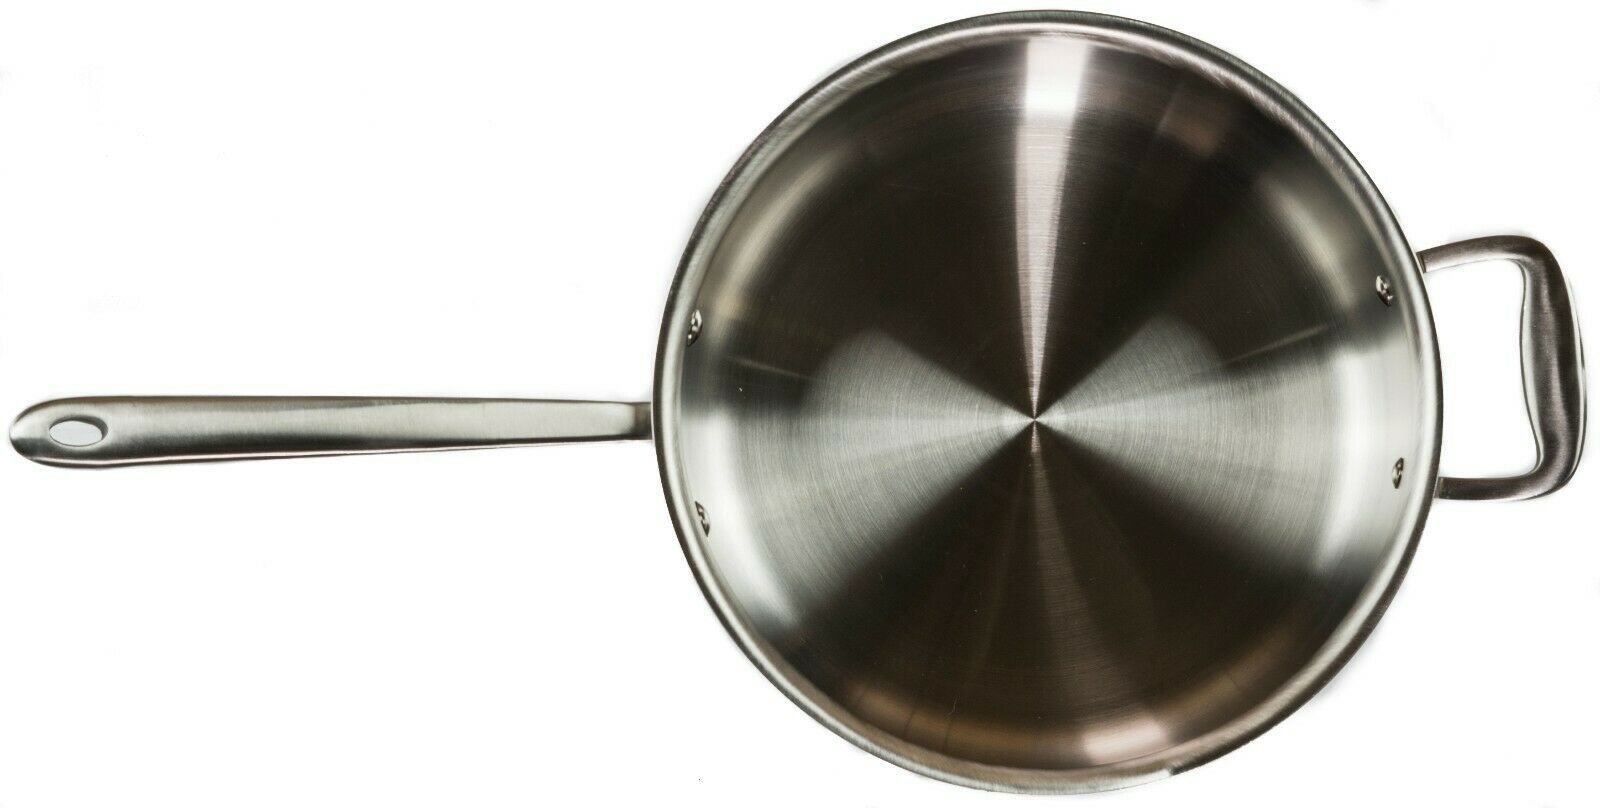 All-Clad 12 Fry Pan w/Copper Core, for Everyday Cooking Tasks - 6112 SS